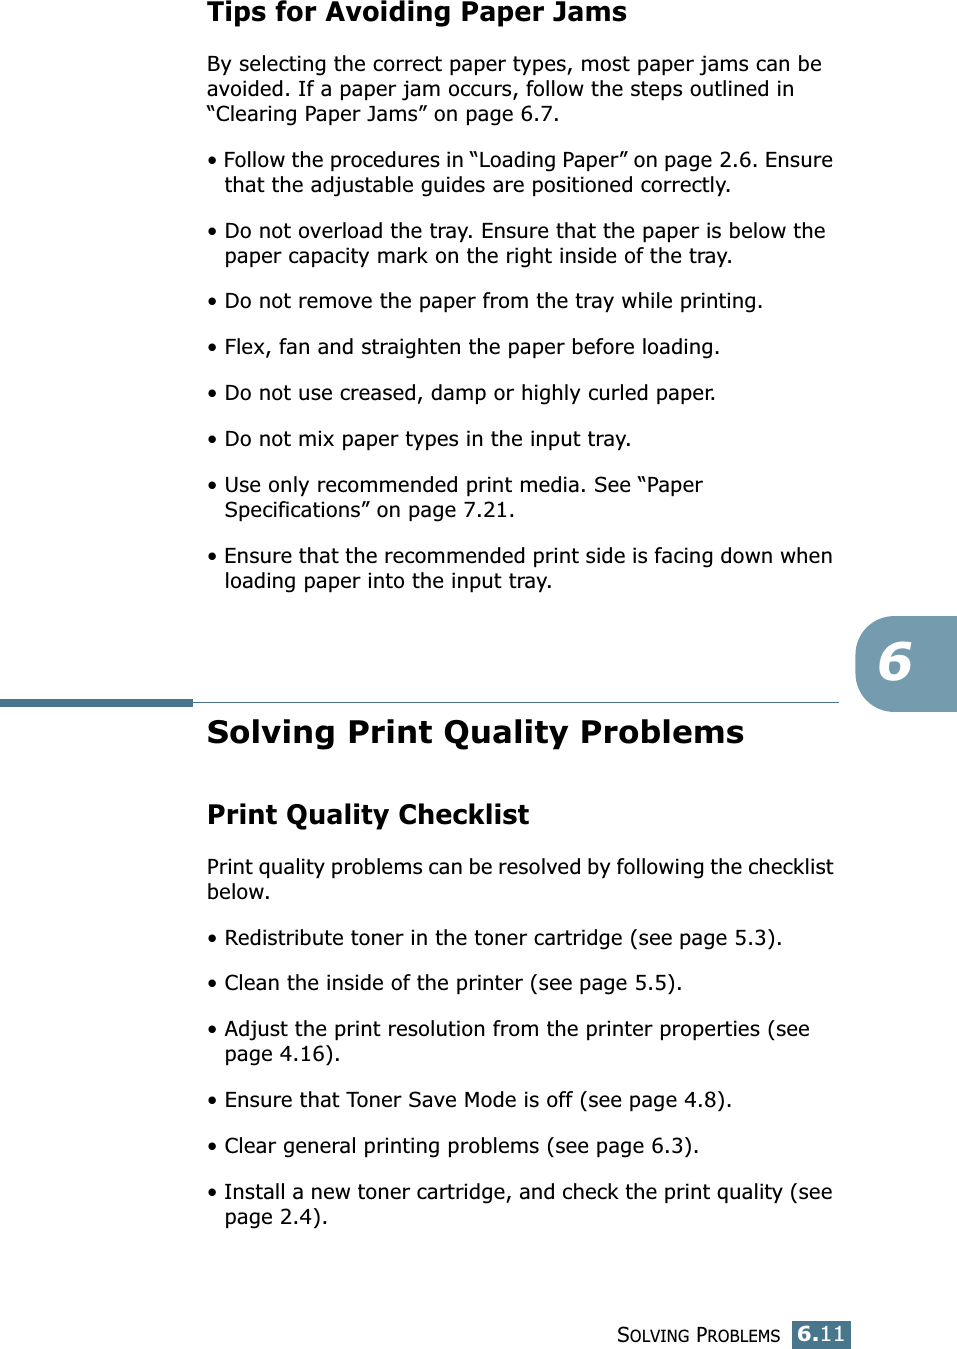 SOLVING PROBLEMS6.116Tips for Avoiding Paper JamsBy selecting the correct paper types, most paper jams can be avoided. If a paper jam occurs, follow the steps outlined in “Clearing Paper Jams” on page 6.7. • Follow the procedures in “Loading Paper” on page 2.6. Ensure that the adjustable guides are positioned correctly.• Do not overload the tray. Ensure that the paper is below the paper capacity mark on the right inside of the tray.• Do not remove the paper from the tray while printing.• Flex, fan and straighten the paper before loading. • Do not use creased, damp or highly curled paper.• Do not mix paper types in the input tray.• Use only recommended print media. See “Paper Specifications” on page 7.21.• Ensure that the recommended print side is facing down when loading paper into the input tray.Solving Print Quality ProblemsPrint Quality ChecklistPrint quality problems can be resolved by following the checklist below.• Redistribute toner in the toner cartridge (see page 5.3).• Clean the inside of the printer (see page 5.5).• Adjust the print resolution from the printer properties (see page 4.16).• Ensure that Toner Save Mode is off (see page 4.8).• Clear general printing problems (see page 6.3).• Install a new toner cartridge, and check the print quality (see page 2.4). 